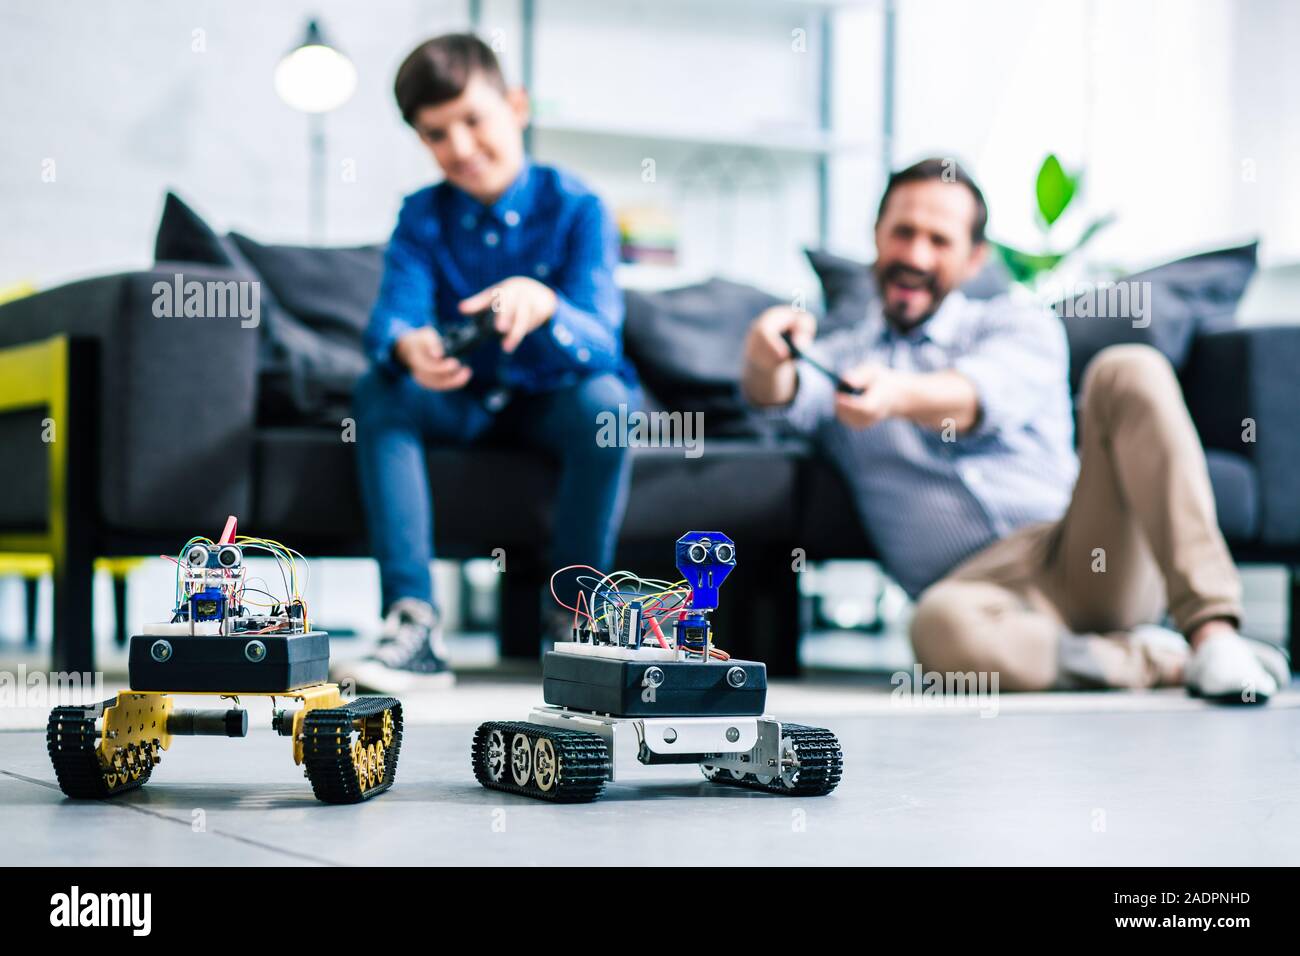 Selective focus of robotic devices standing on the floor Stock Photo